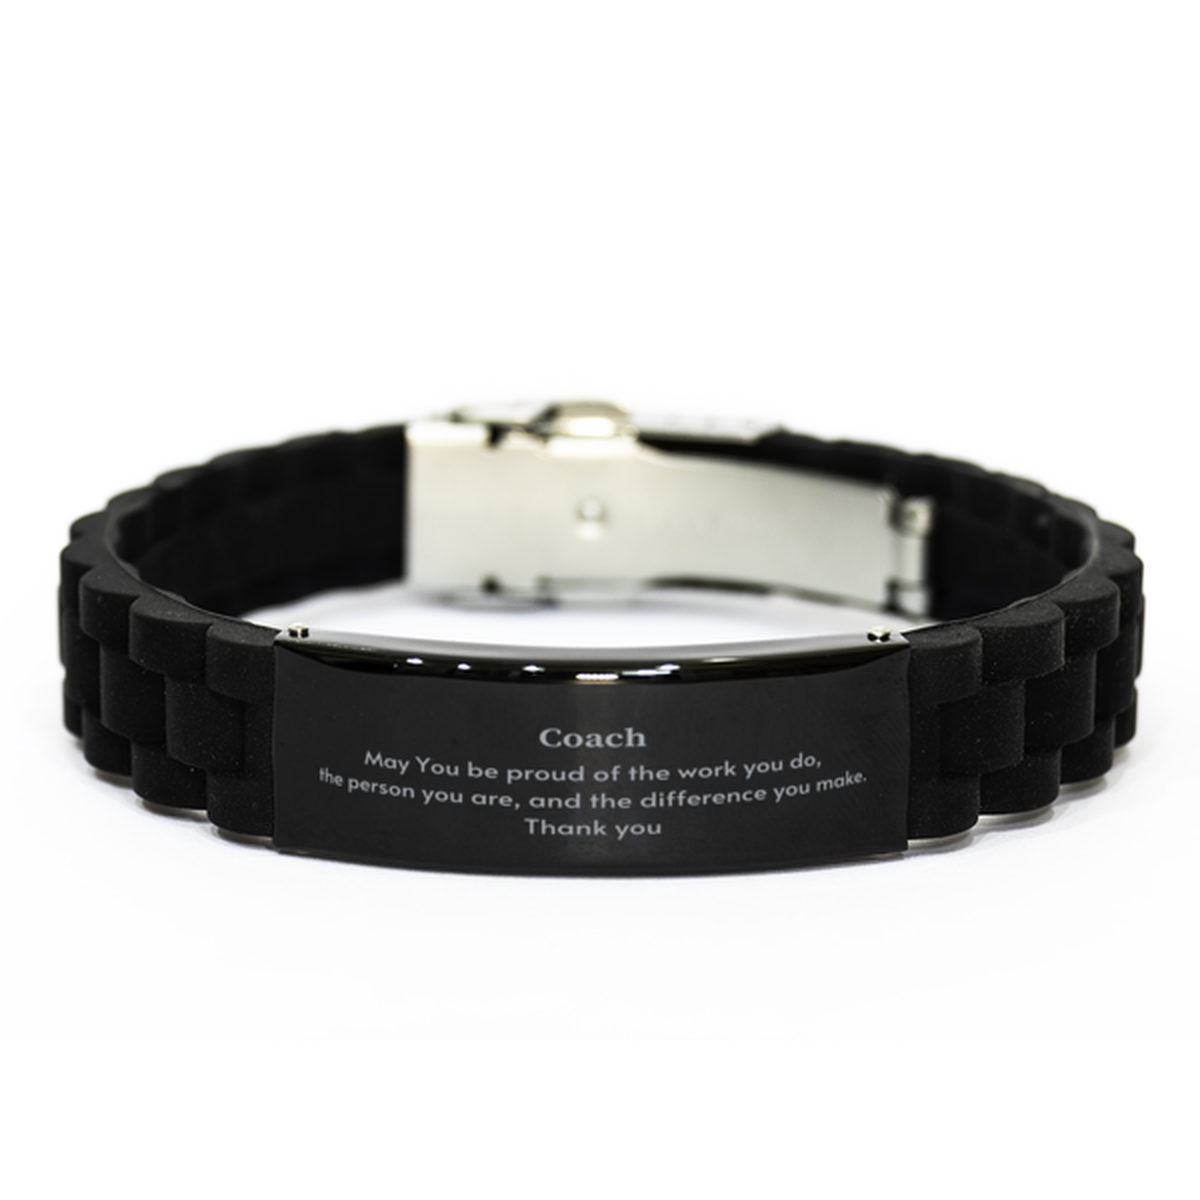 Heartwarming Black Glidelock Clasp Bracelet Retirement Coworkers Gifts for Coach, Coach May You be proud of the work you do, the person you are Gifts for Boss Men Women Friends